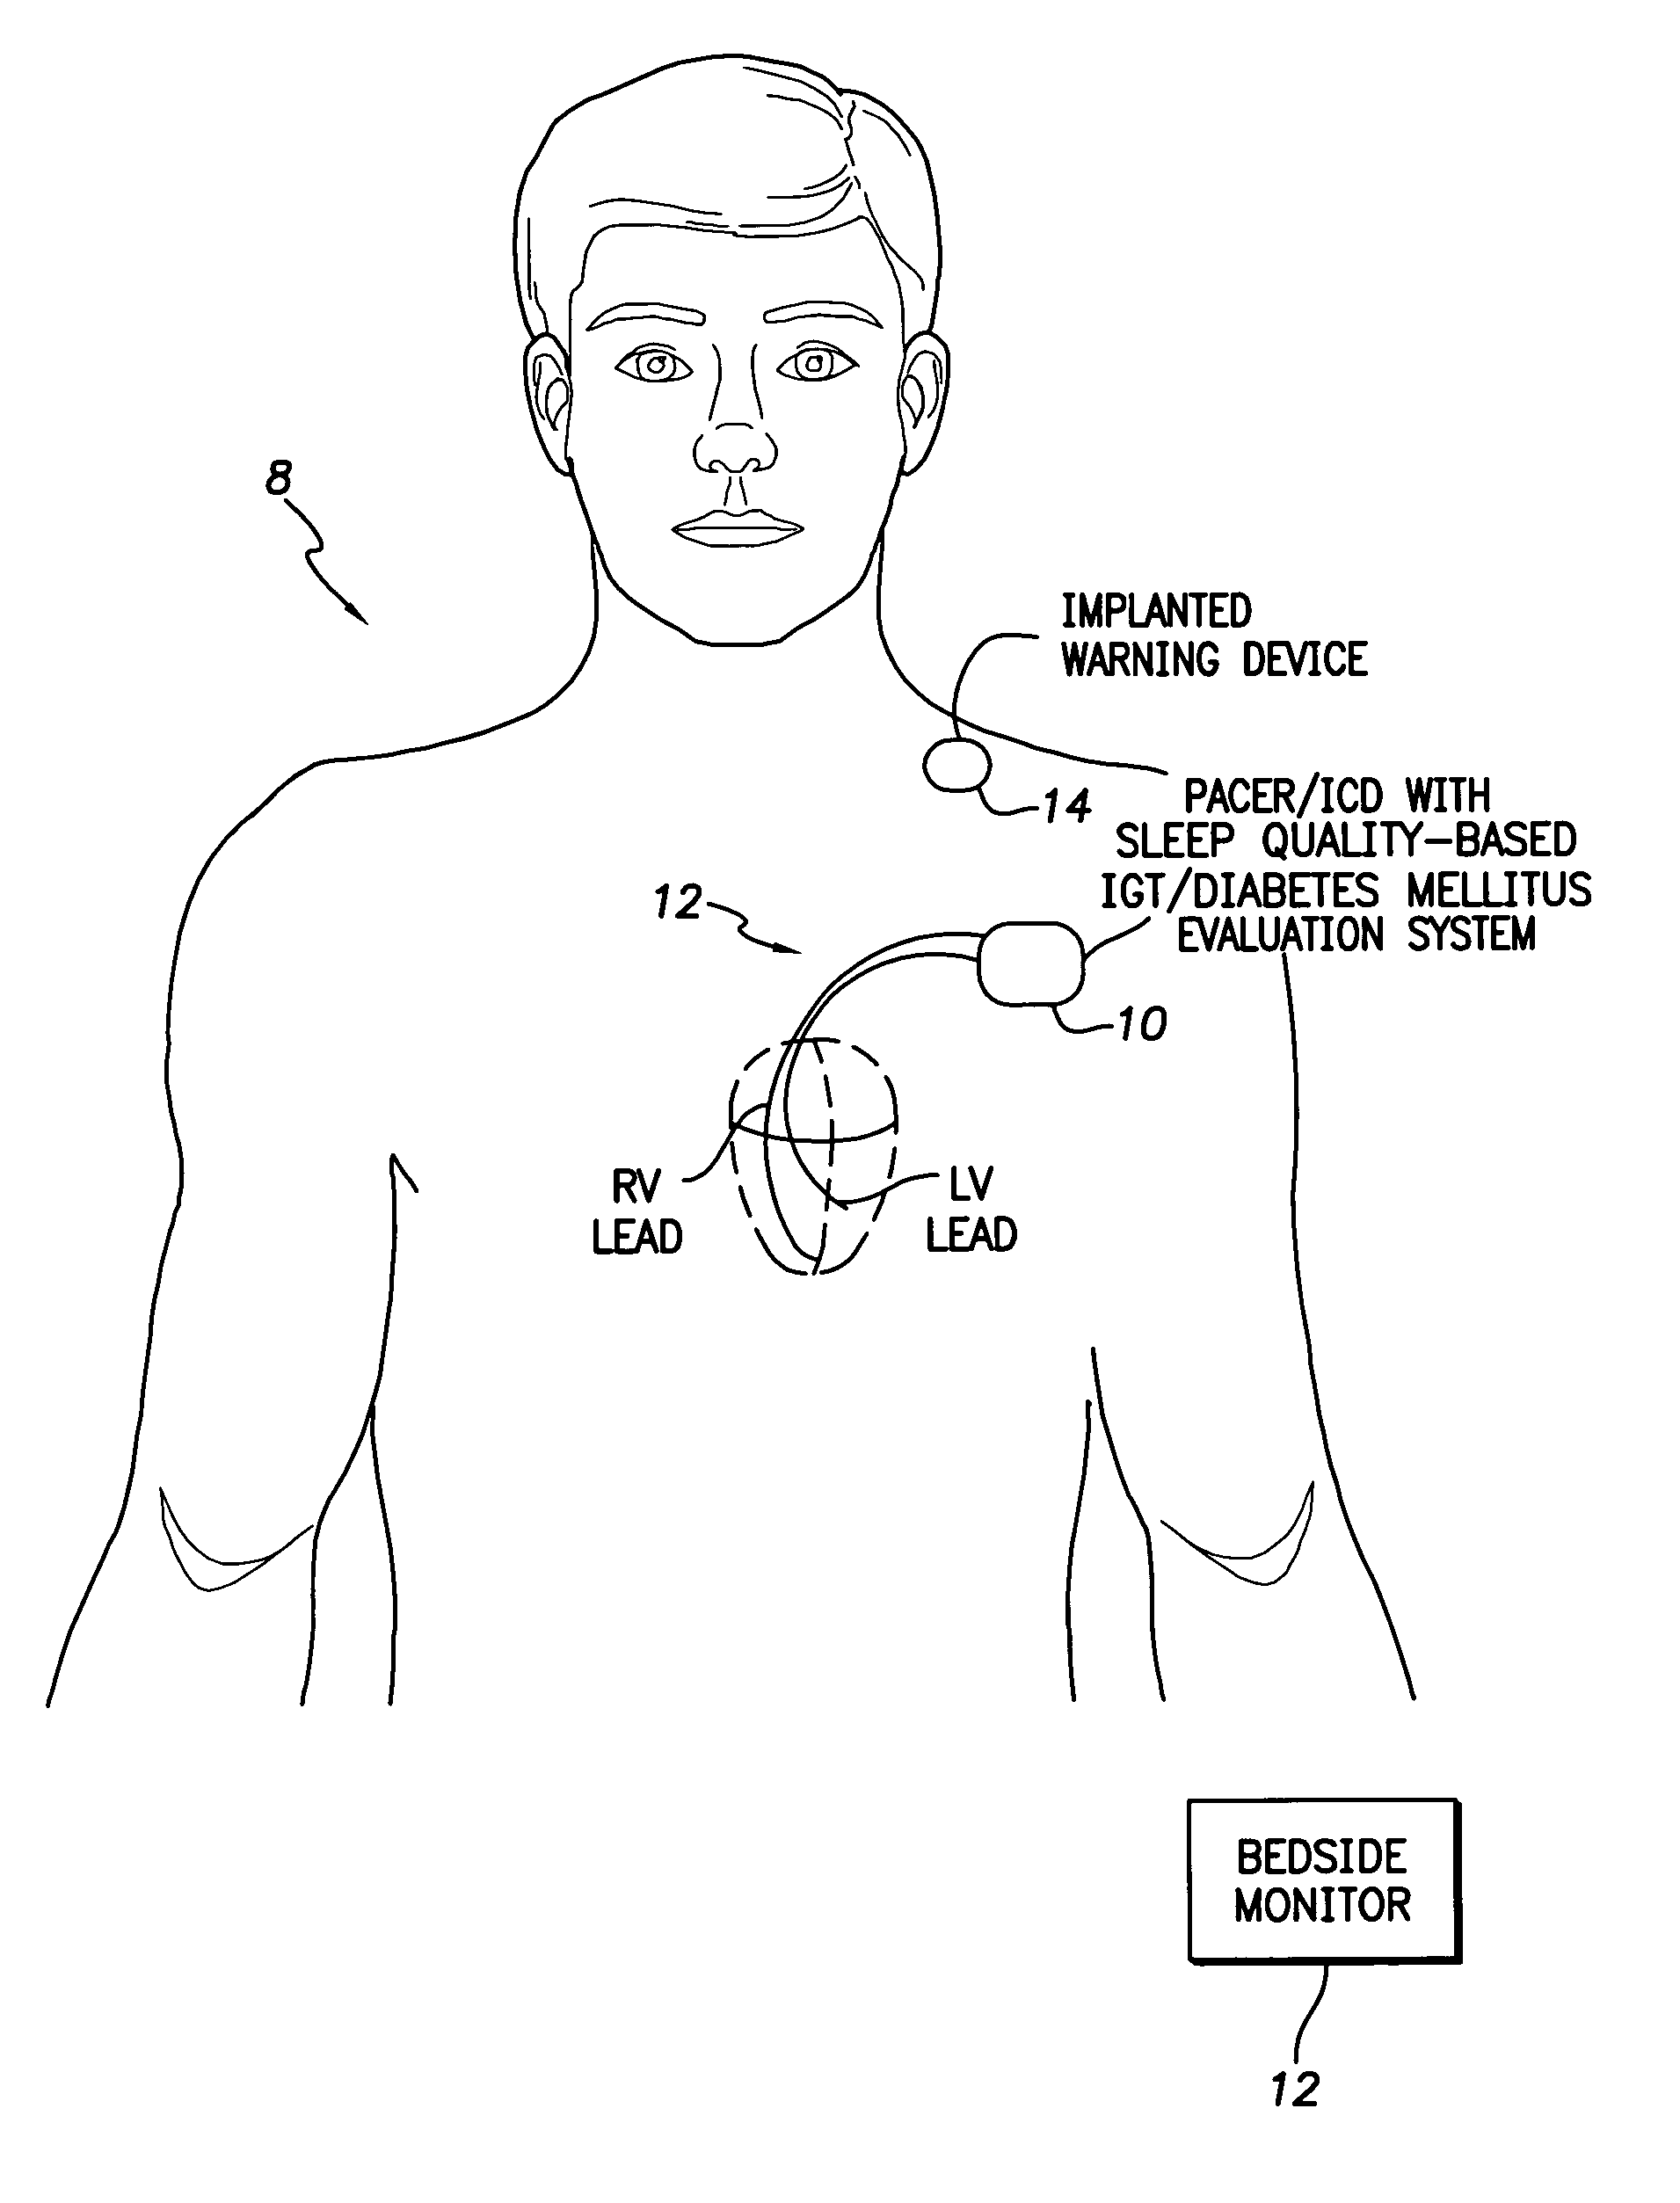 System and method for evaluating impaired glucose tolerance and diabetes mellitus within a patient using an implantable medical device